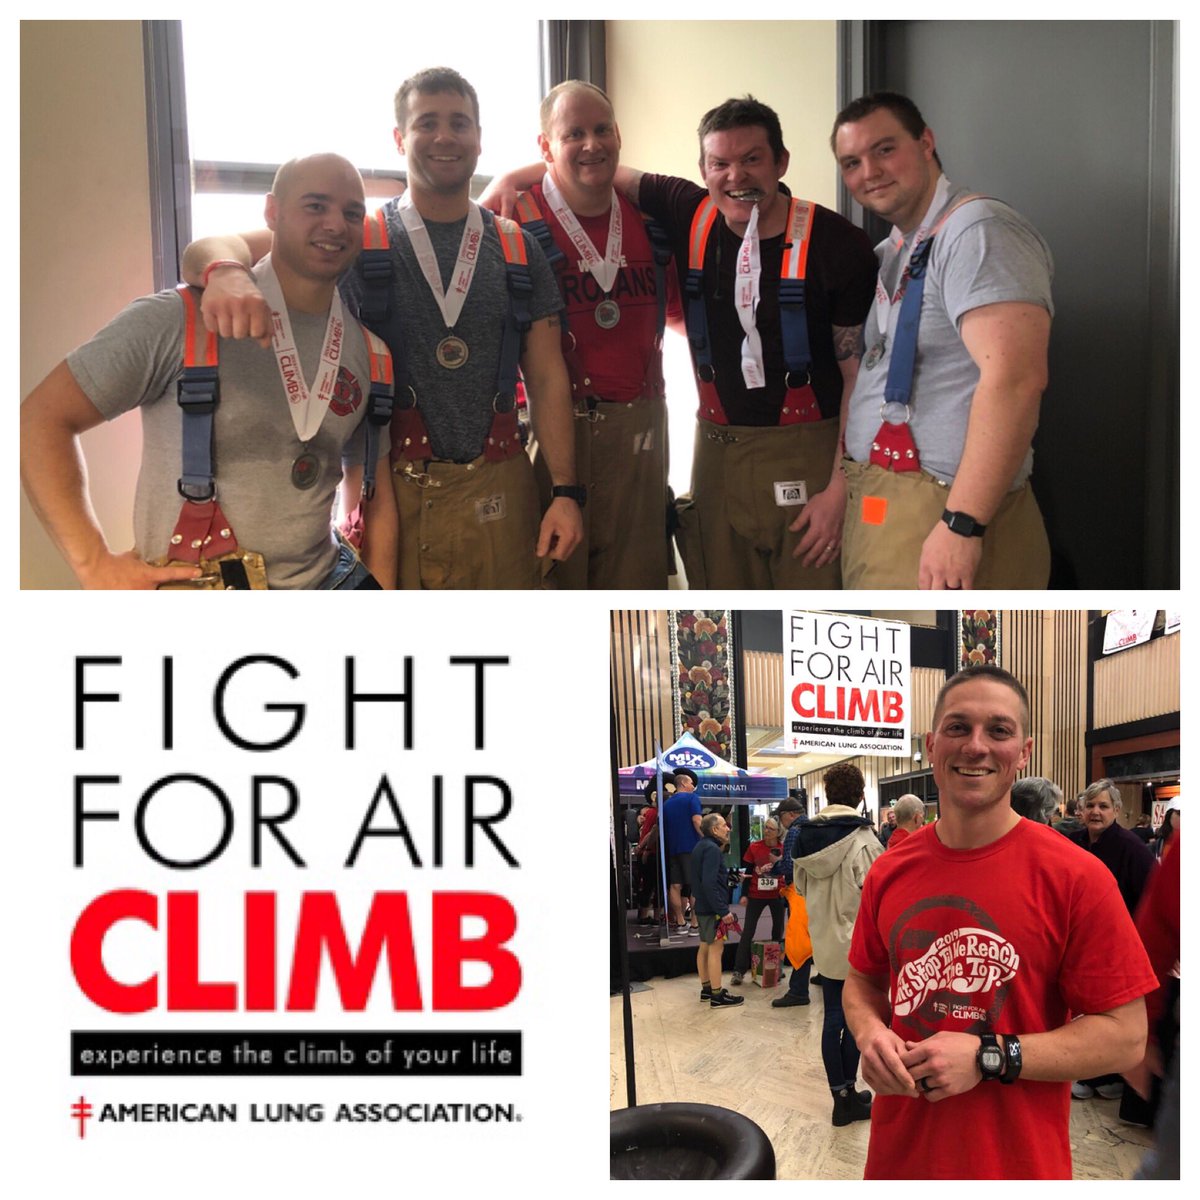 5 members of CTFD participated in the American Lung Association Fight for Air Climb today, climbing the Carew Tower in full gear.  Another member took on the vertical mile ascending the tower 10 times.  Together they raised over $1200 to help fight Lung Disease #FightforAirClimb